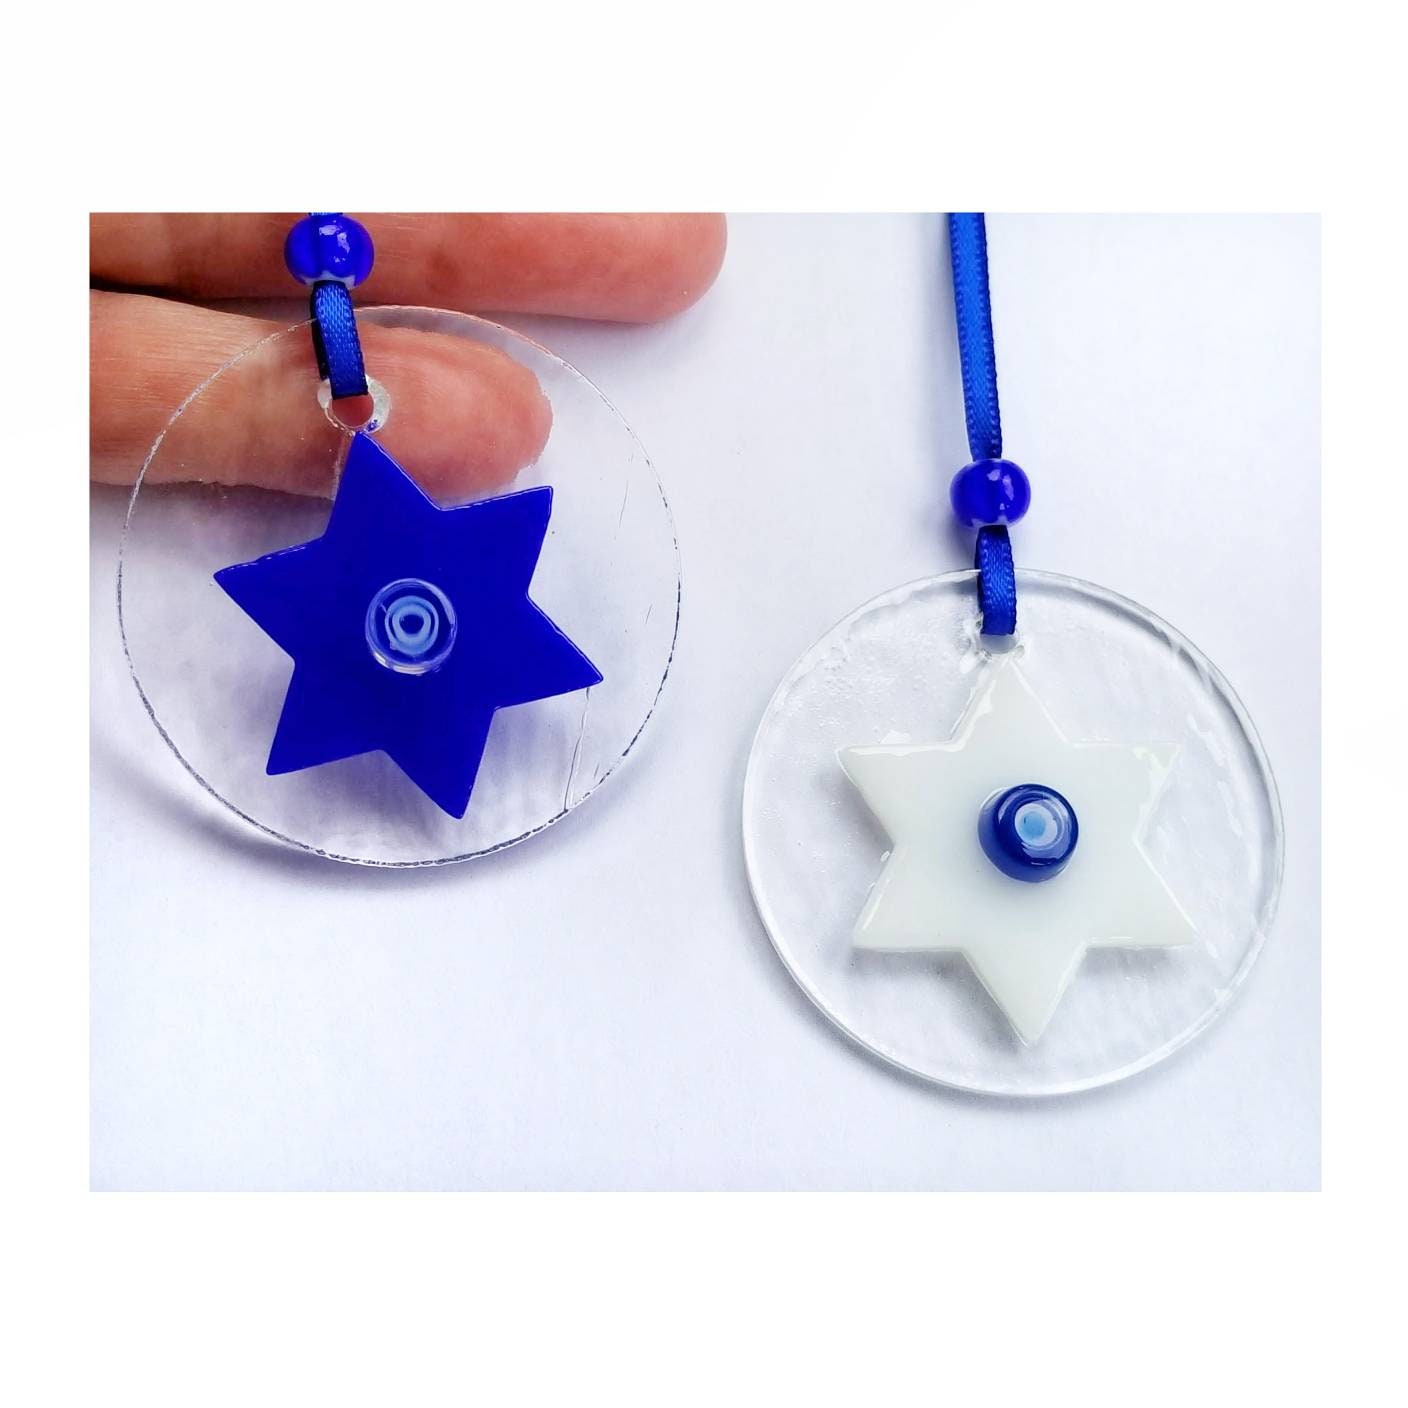 Star of David, Fused Glass Ornaments. Set of 2 Handmade Gift Tags. Bright Blue & White on Clear. 2" Dia. Hanukkah, Bar Mitzvah Celebrations.